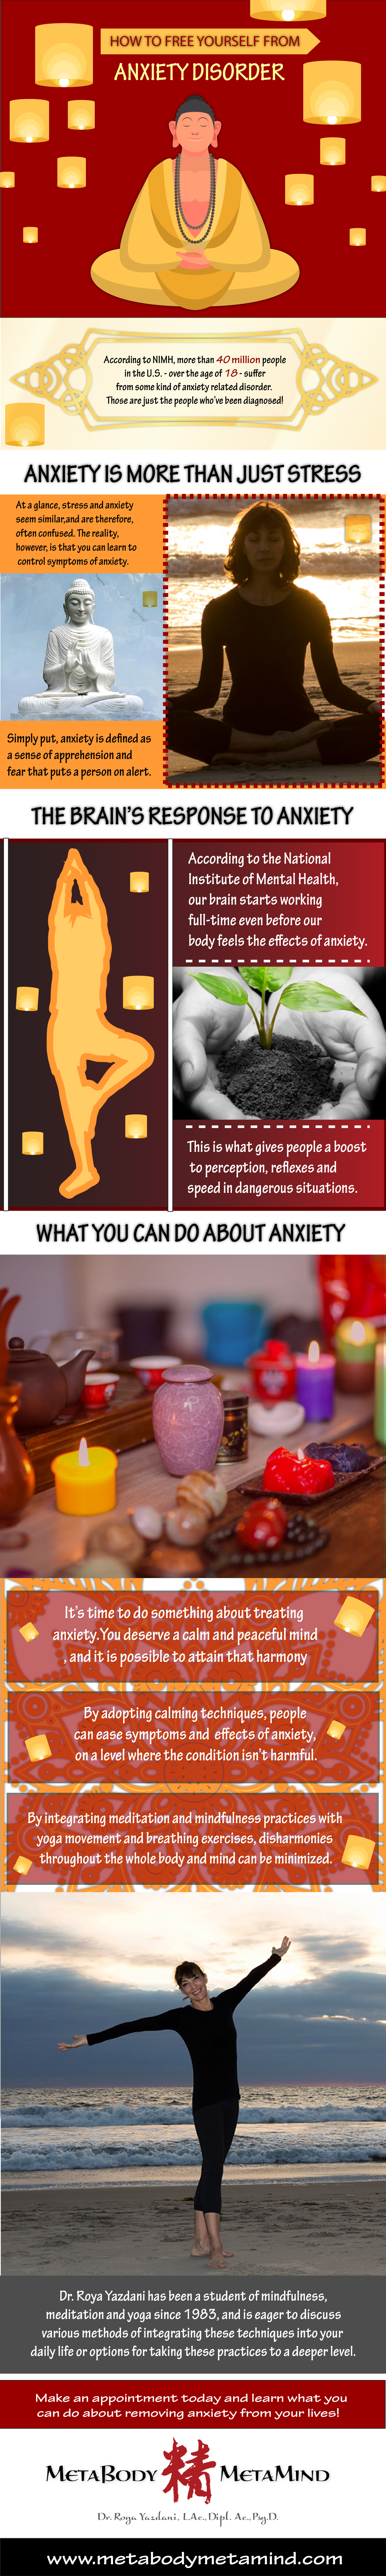 Anxiety is more than just stress